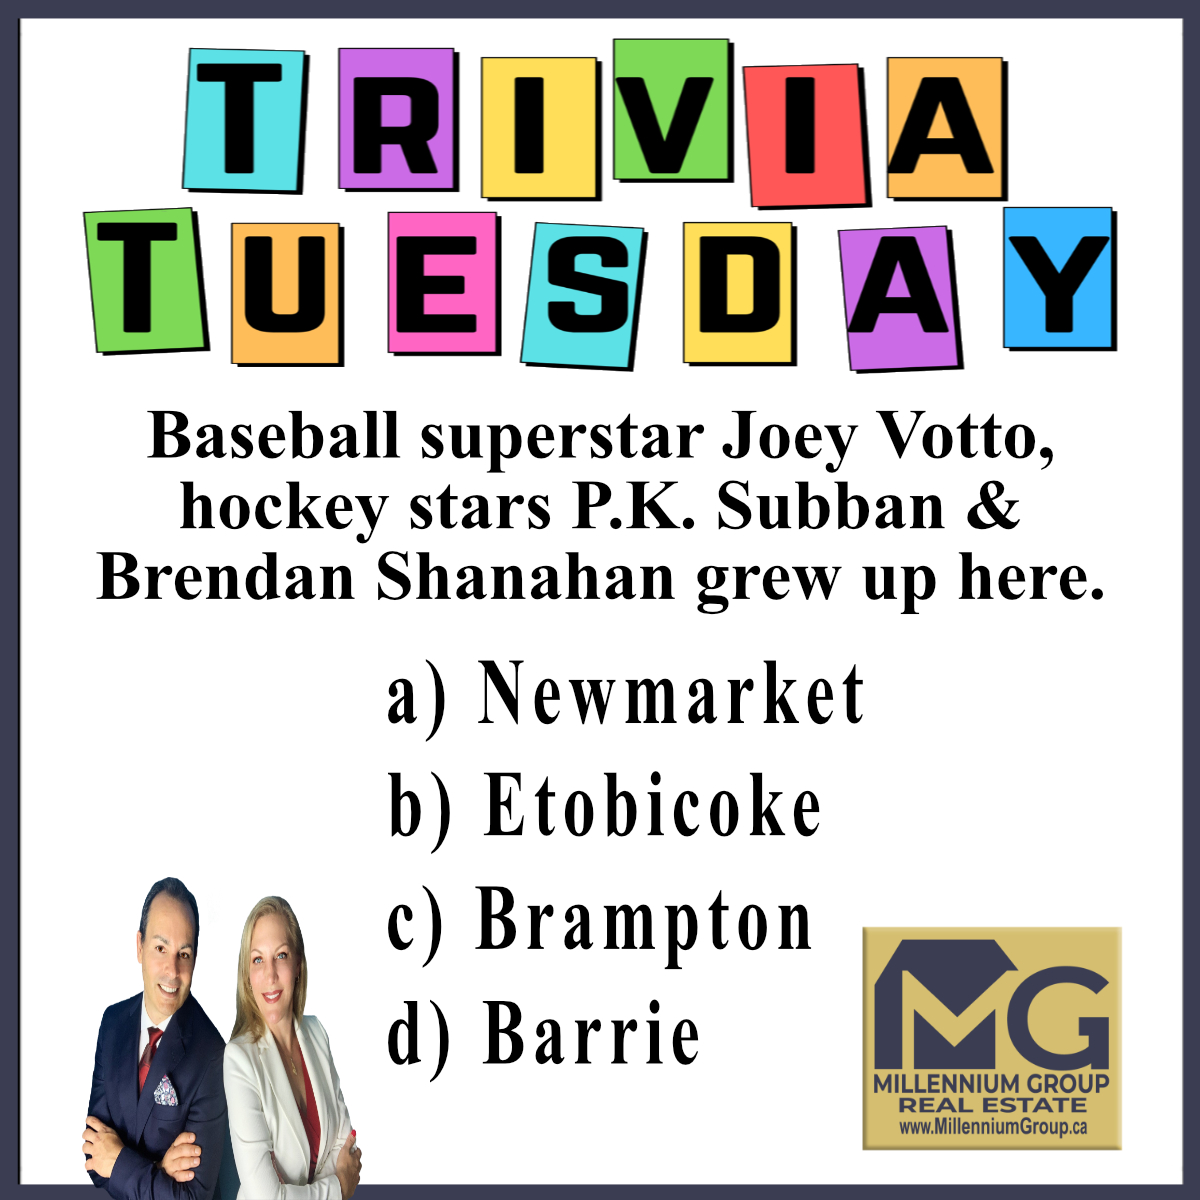 This is also home to the Toronto Police College training facility that opened in 2009👮🏼

#TriviaTuesday #TuesdayTrivia #OntarioTrivia #KendraCutroneBroker #TonyCutroneRealtor #MillenniumGroupRealEstate #FREEHomeEvaluation #FREEHomeStaging #FixAndFlipExpert #WeSellForMore